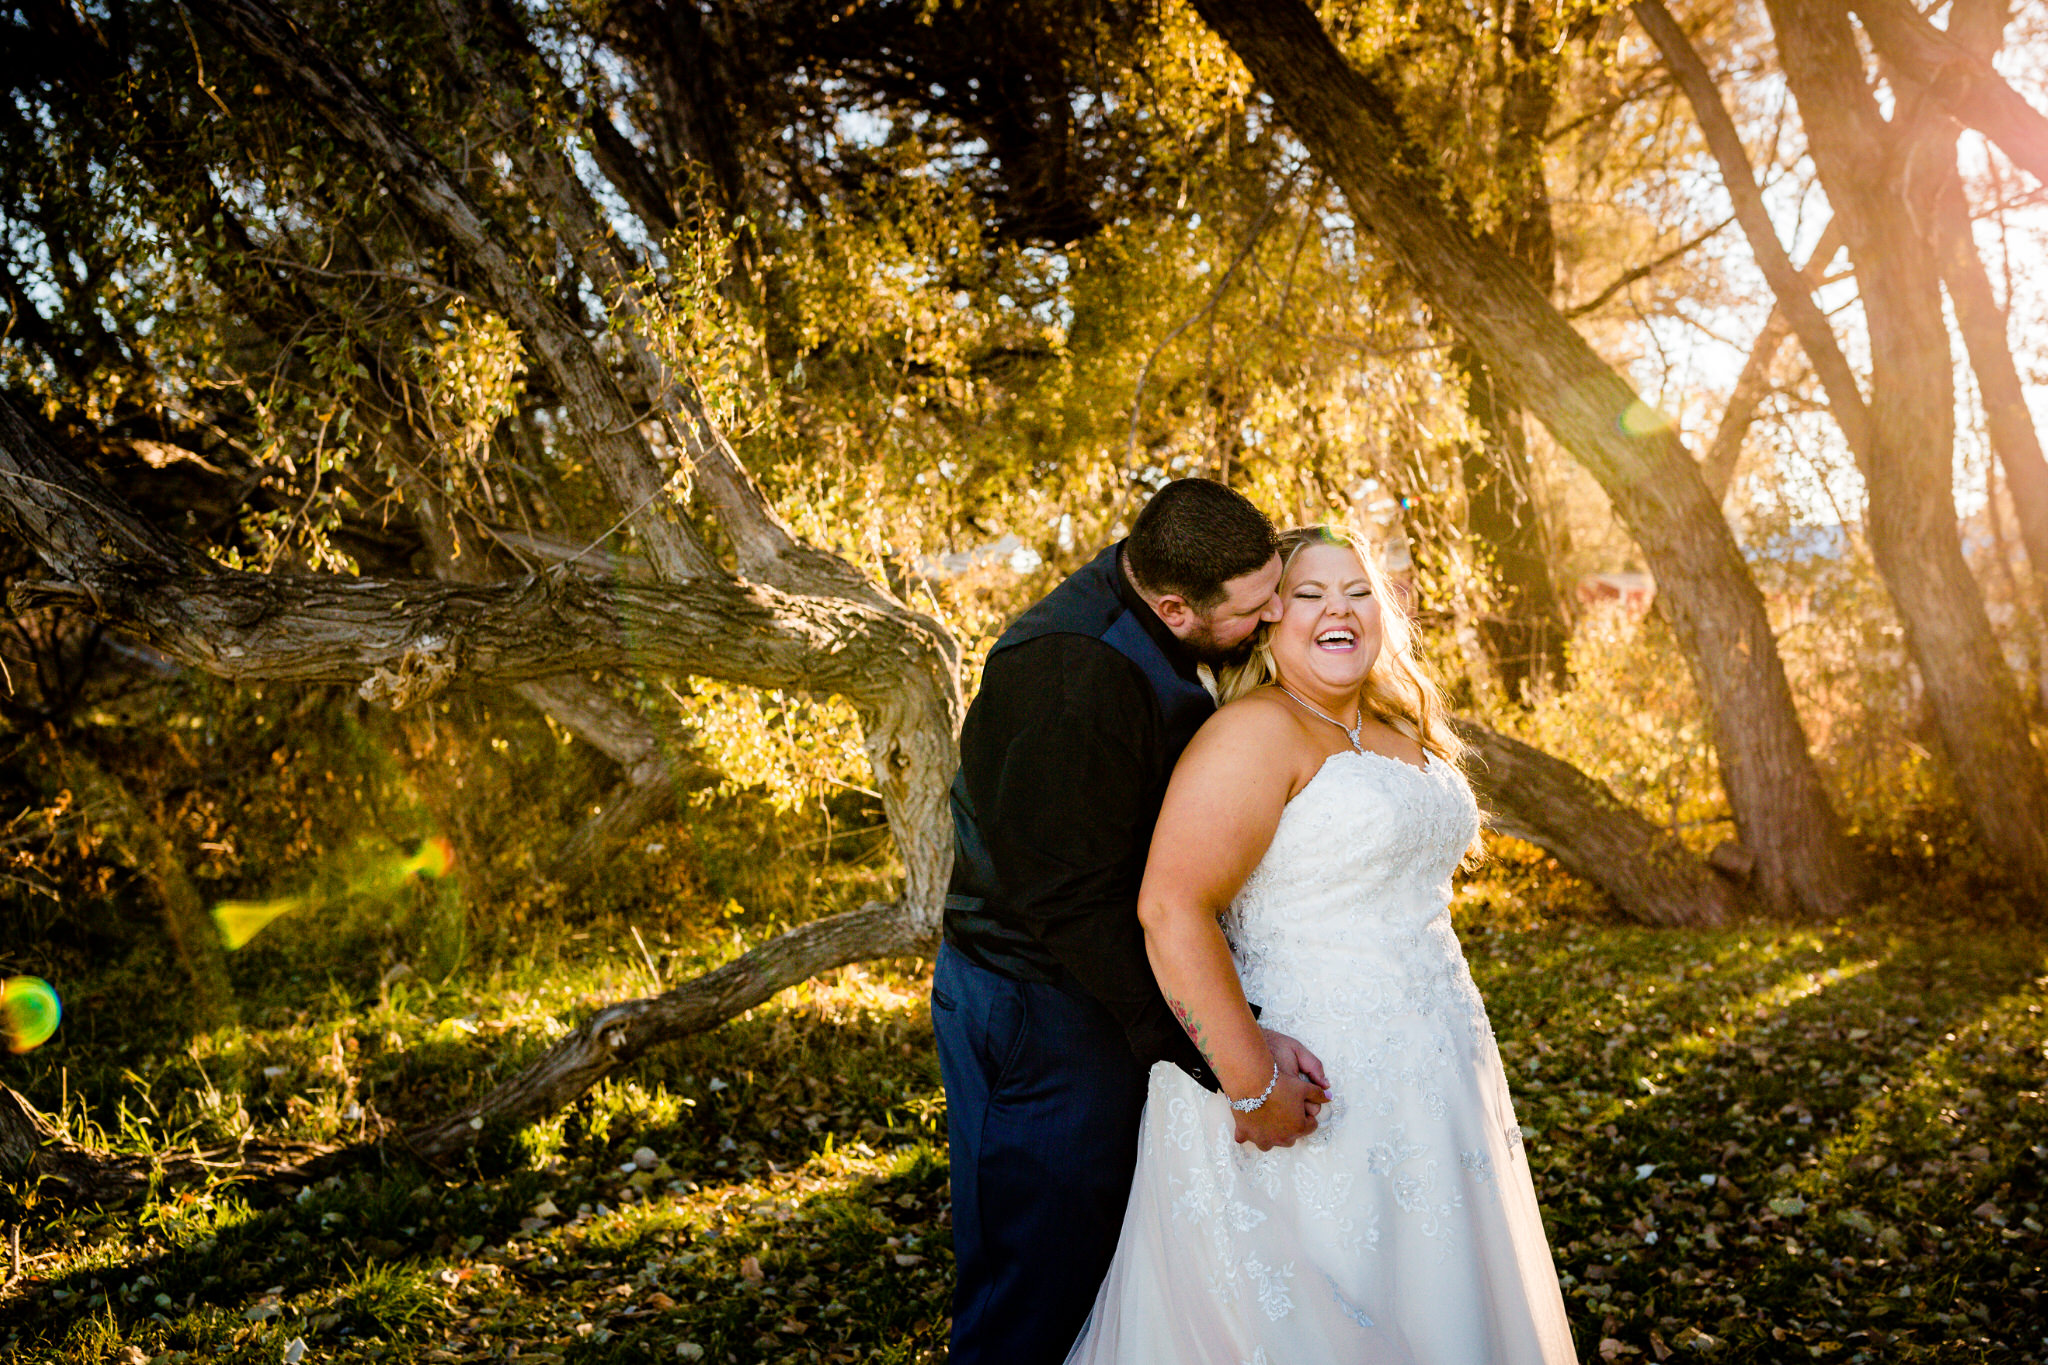 Groom kissing the bride on the neck during the couple's portrait session. Briana and Kevin's Terry Bison Ranch Wedding by Wyoming Wedding Photographer Jennifer Garza, Wyoming Wedding, Wyoming Wedding Photographer, Wyoming Engagement Photographer, Wyoming Bride, Couples Goals, Wyoming Wedding, Wedding Photographer, Wyoming Photographer, Wyoming Wedding Photography, Wedding Inspiration, Destination Wedding Photographer, Fall Wedding, Ranch Wedding, Rustic Wedding Inspiration, Wedding Dress Inspo